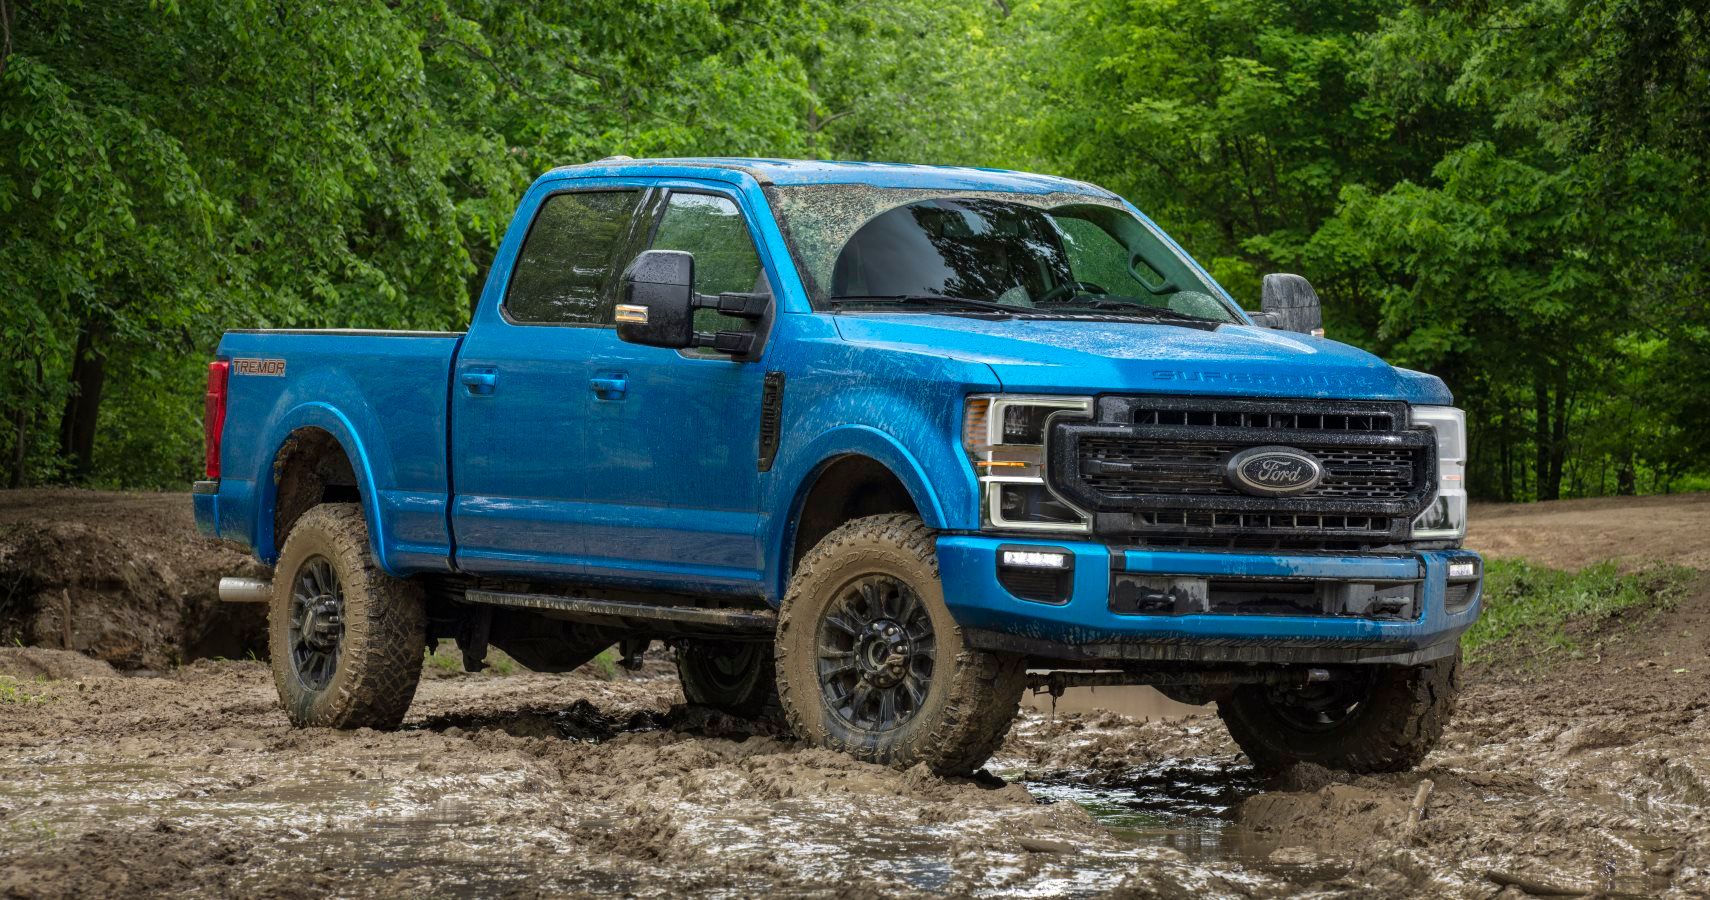 Ford Might Give Tremor Off-Road Package To Regular F-150